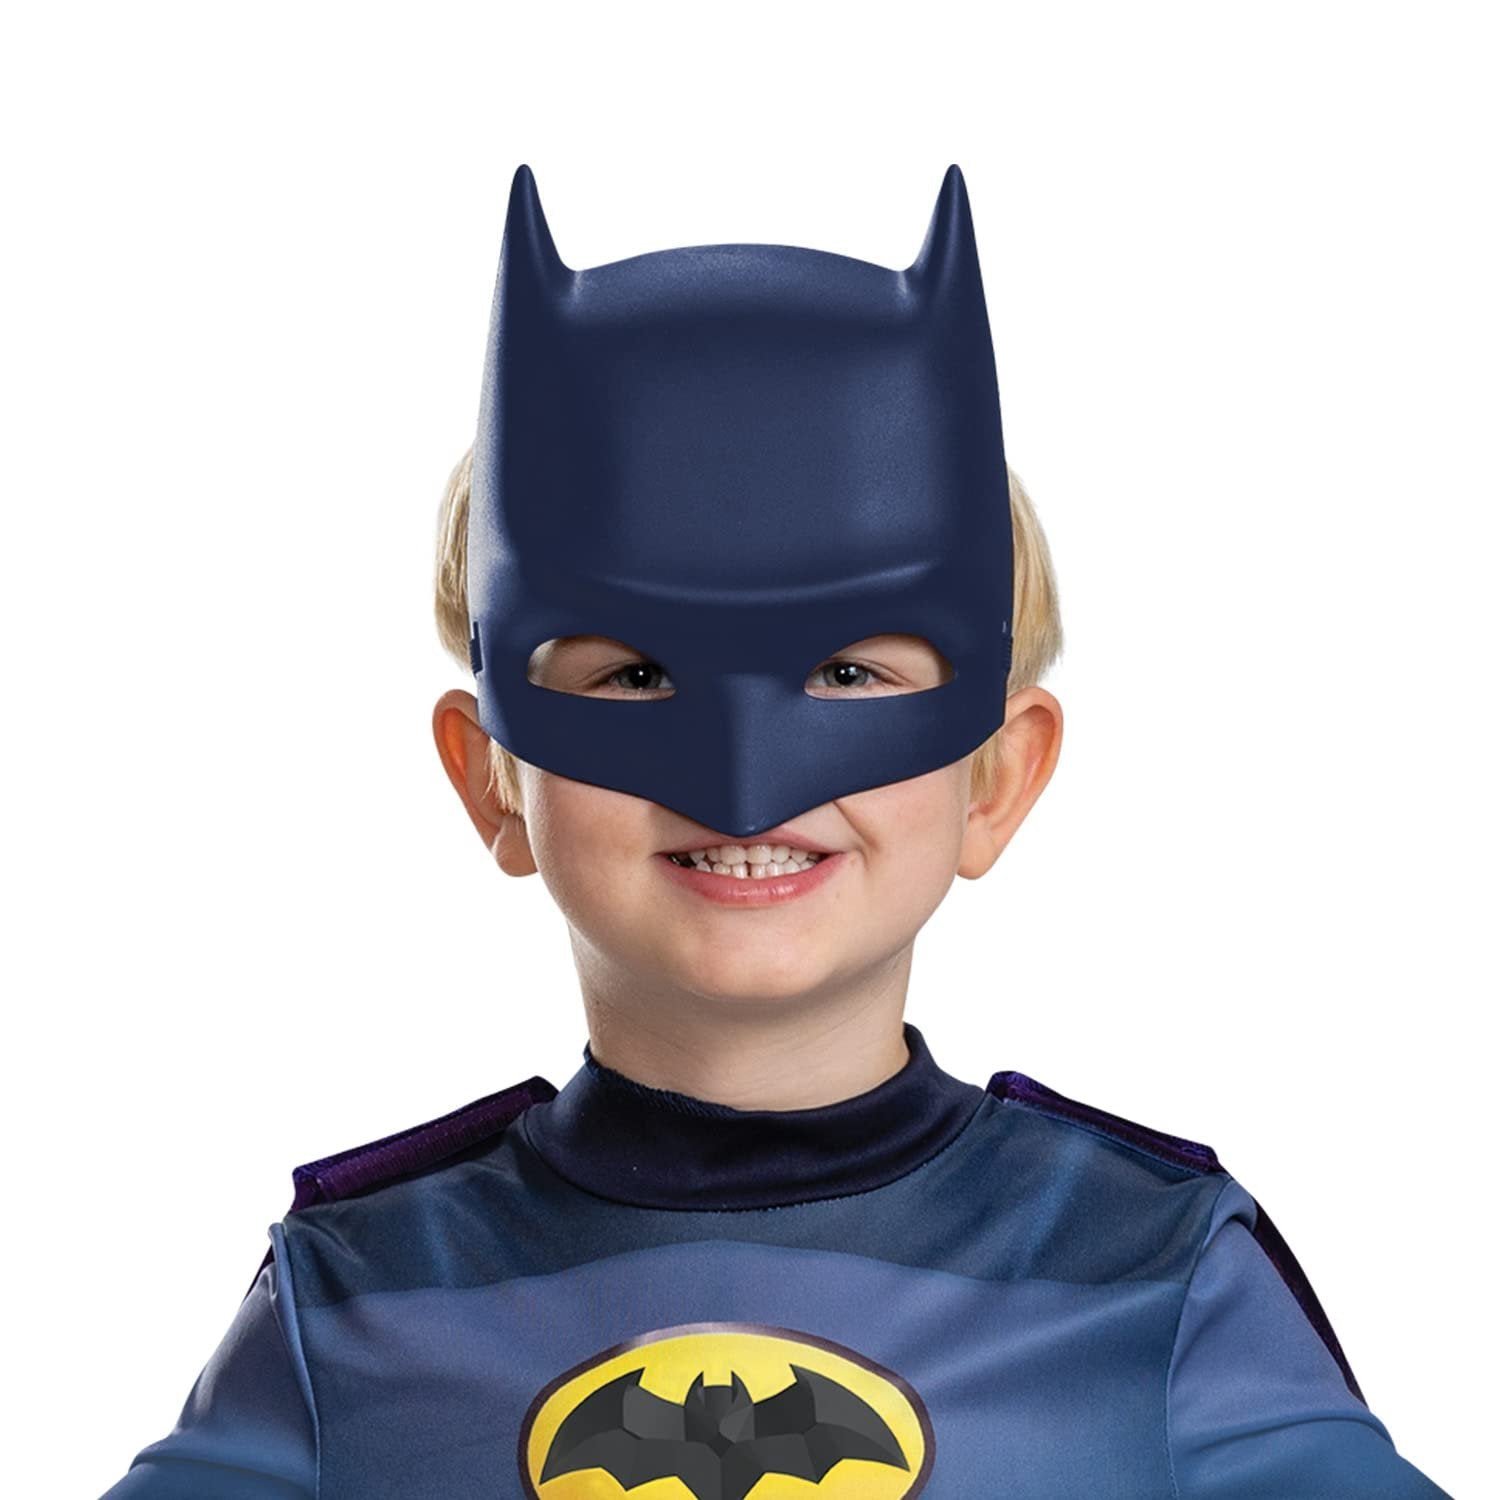 Disguise Batwheels Batman Costume for Kids, Official Batwheels Costume Outfit and Headpiece, Size (4-6)